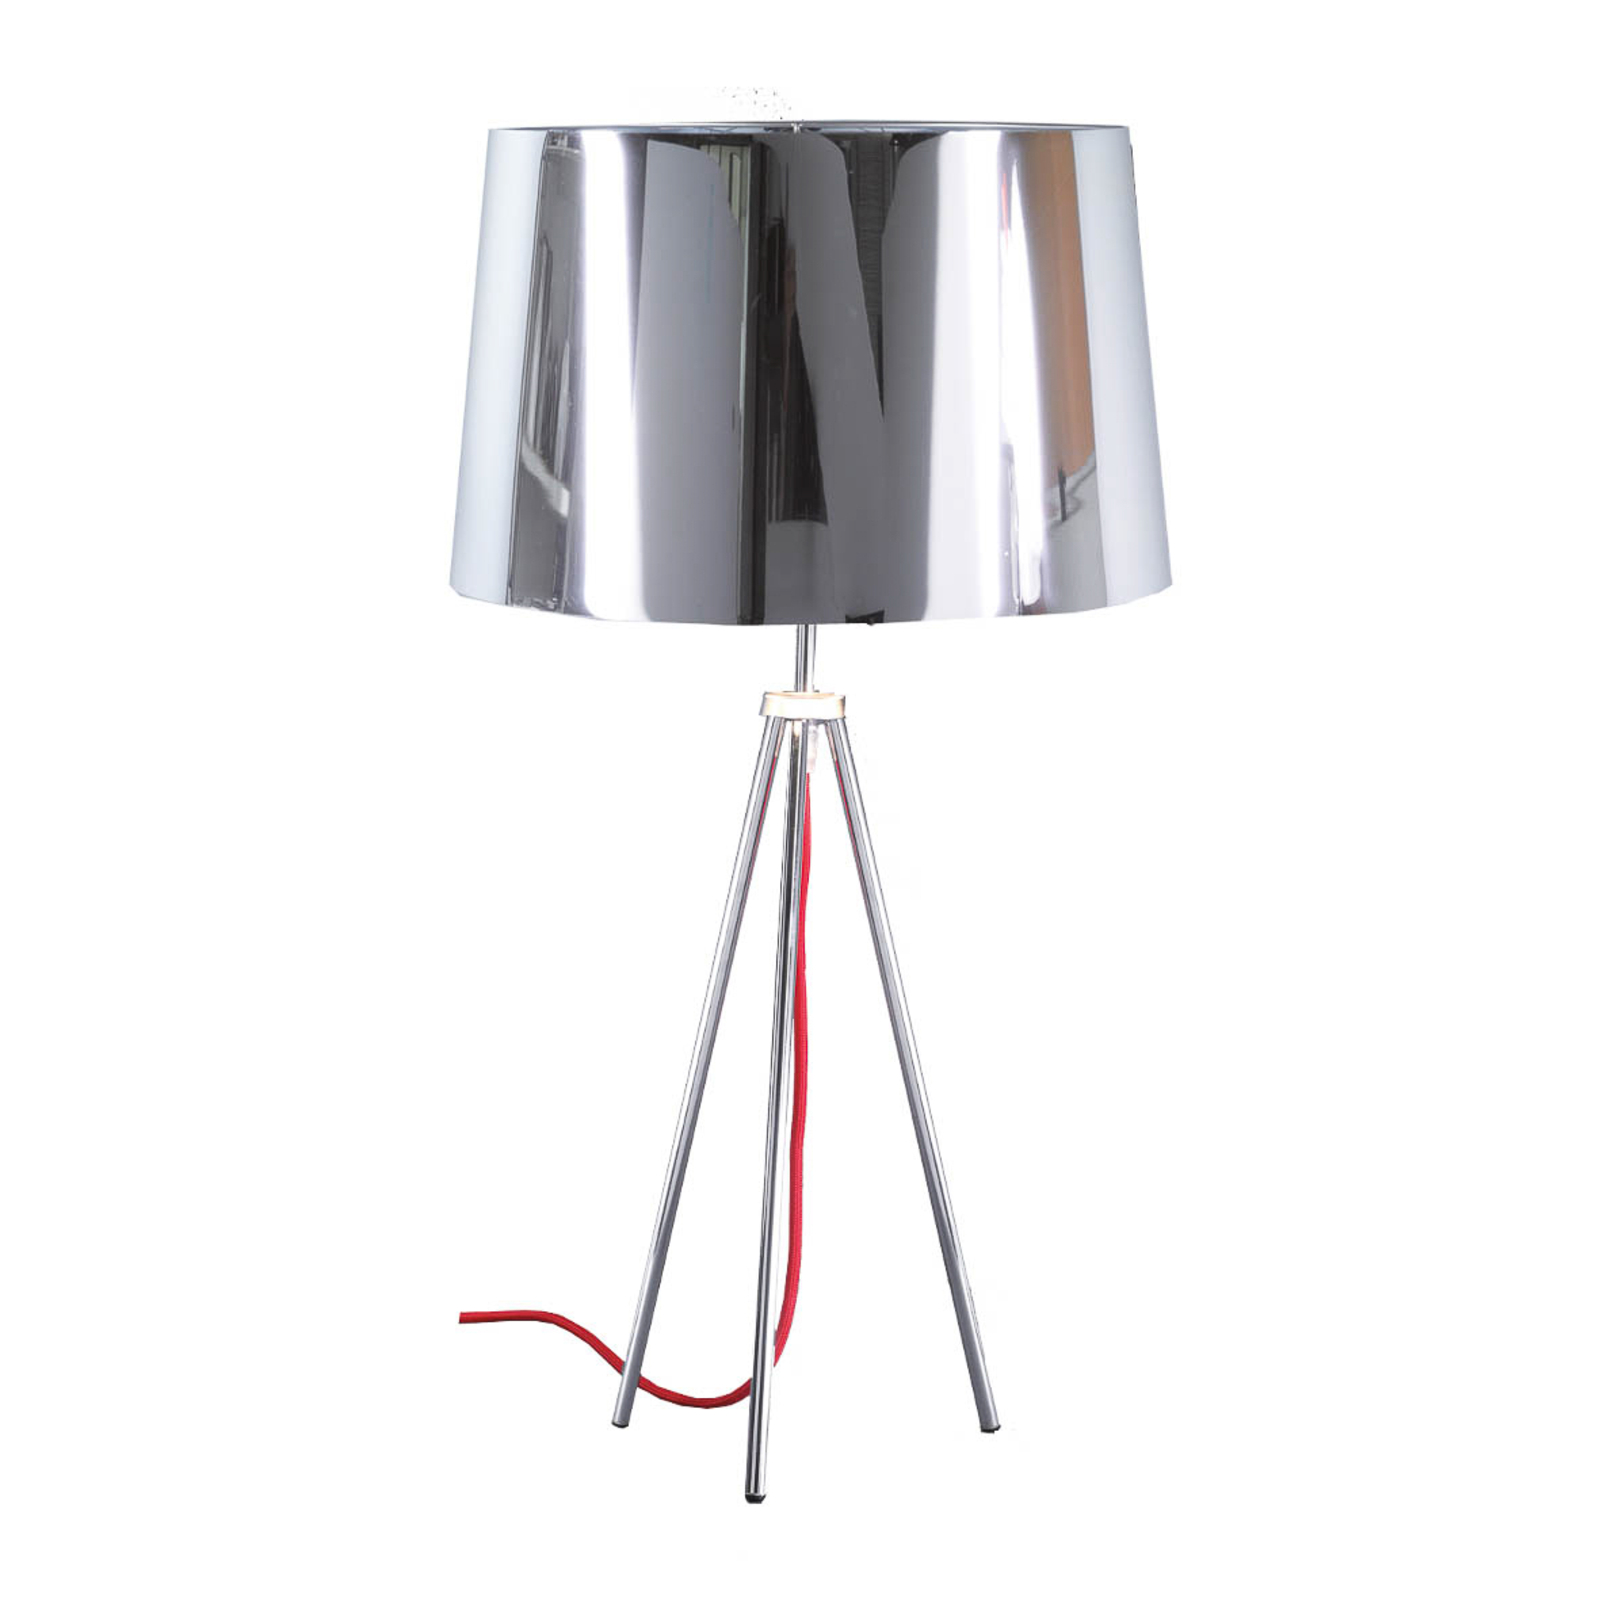 Aluminor Tropic table lamp chrome, red cable